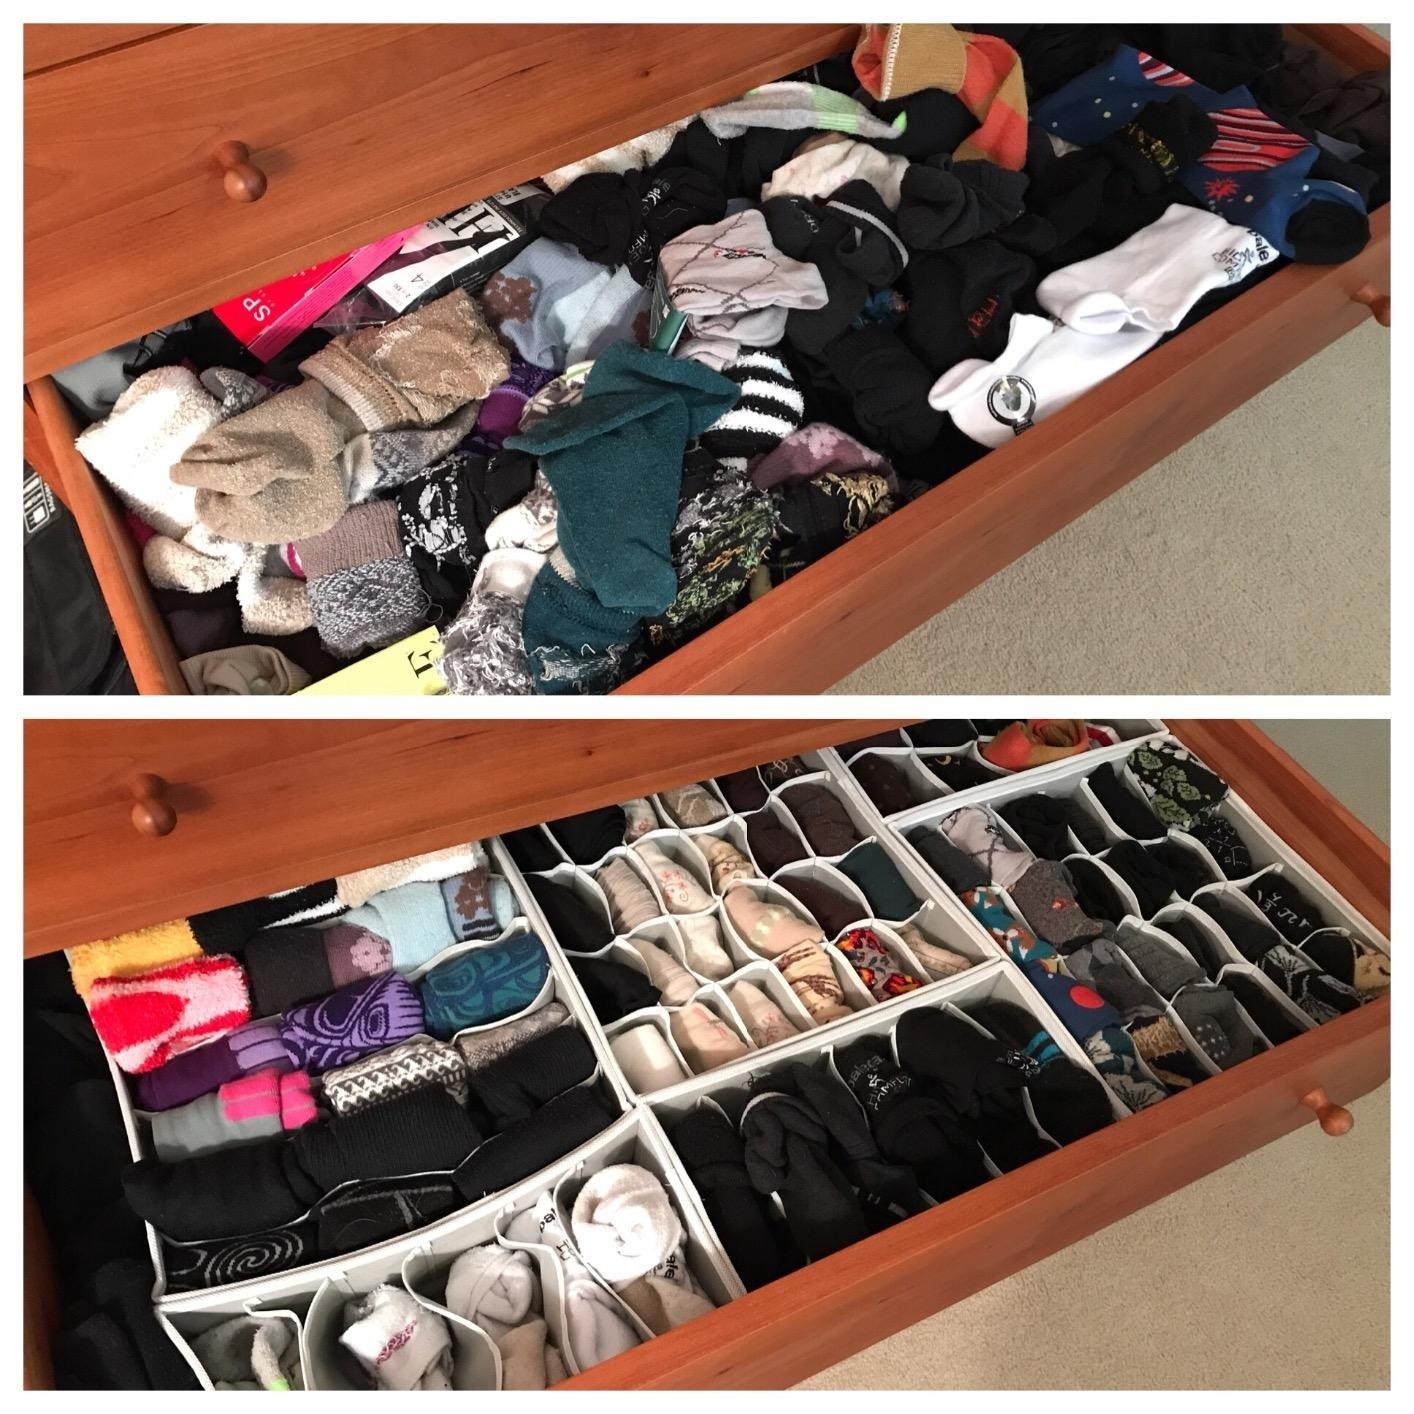 on top: messy drawer filled with disorganized socks and underwear. on bottom: same drawer with organized socks and underwear placed in white drawer dividers